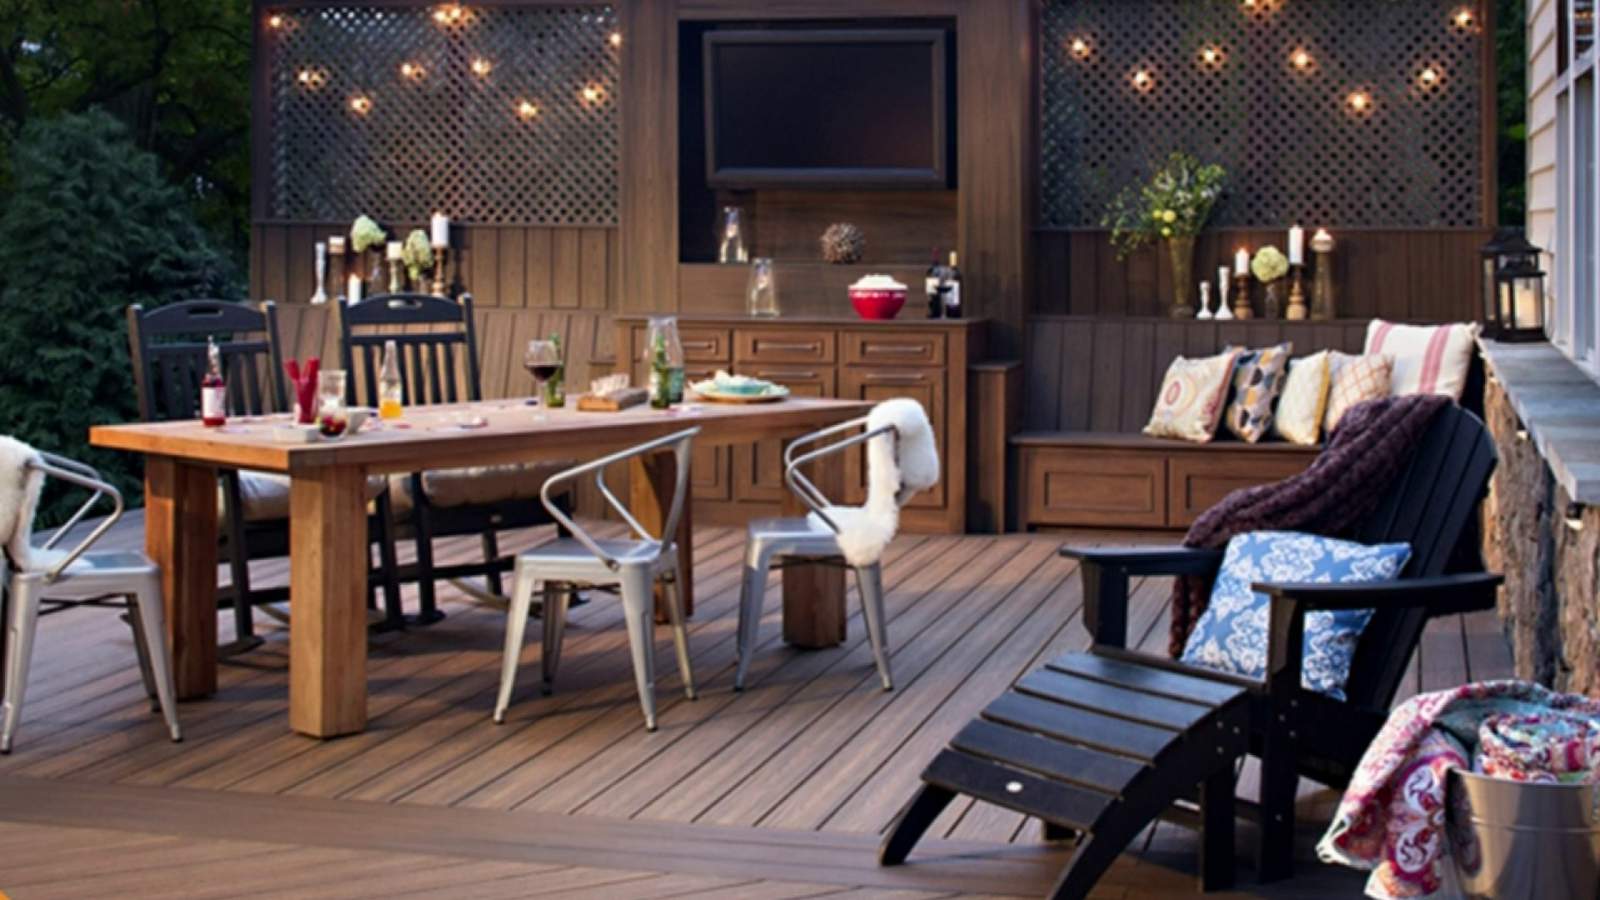 Here’s how to get started on the deck of your dreams